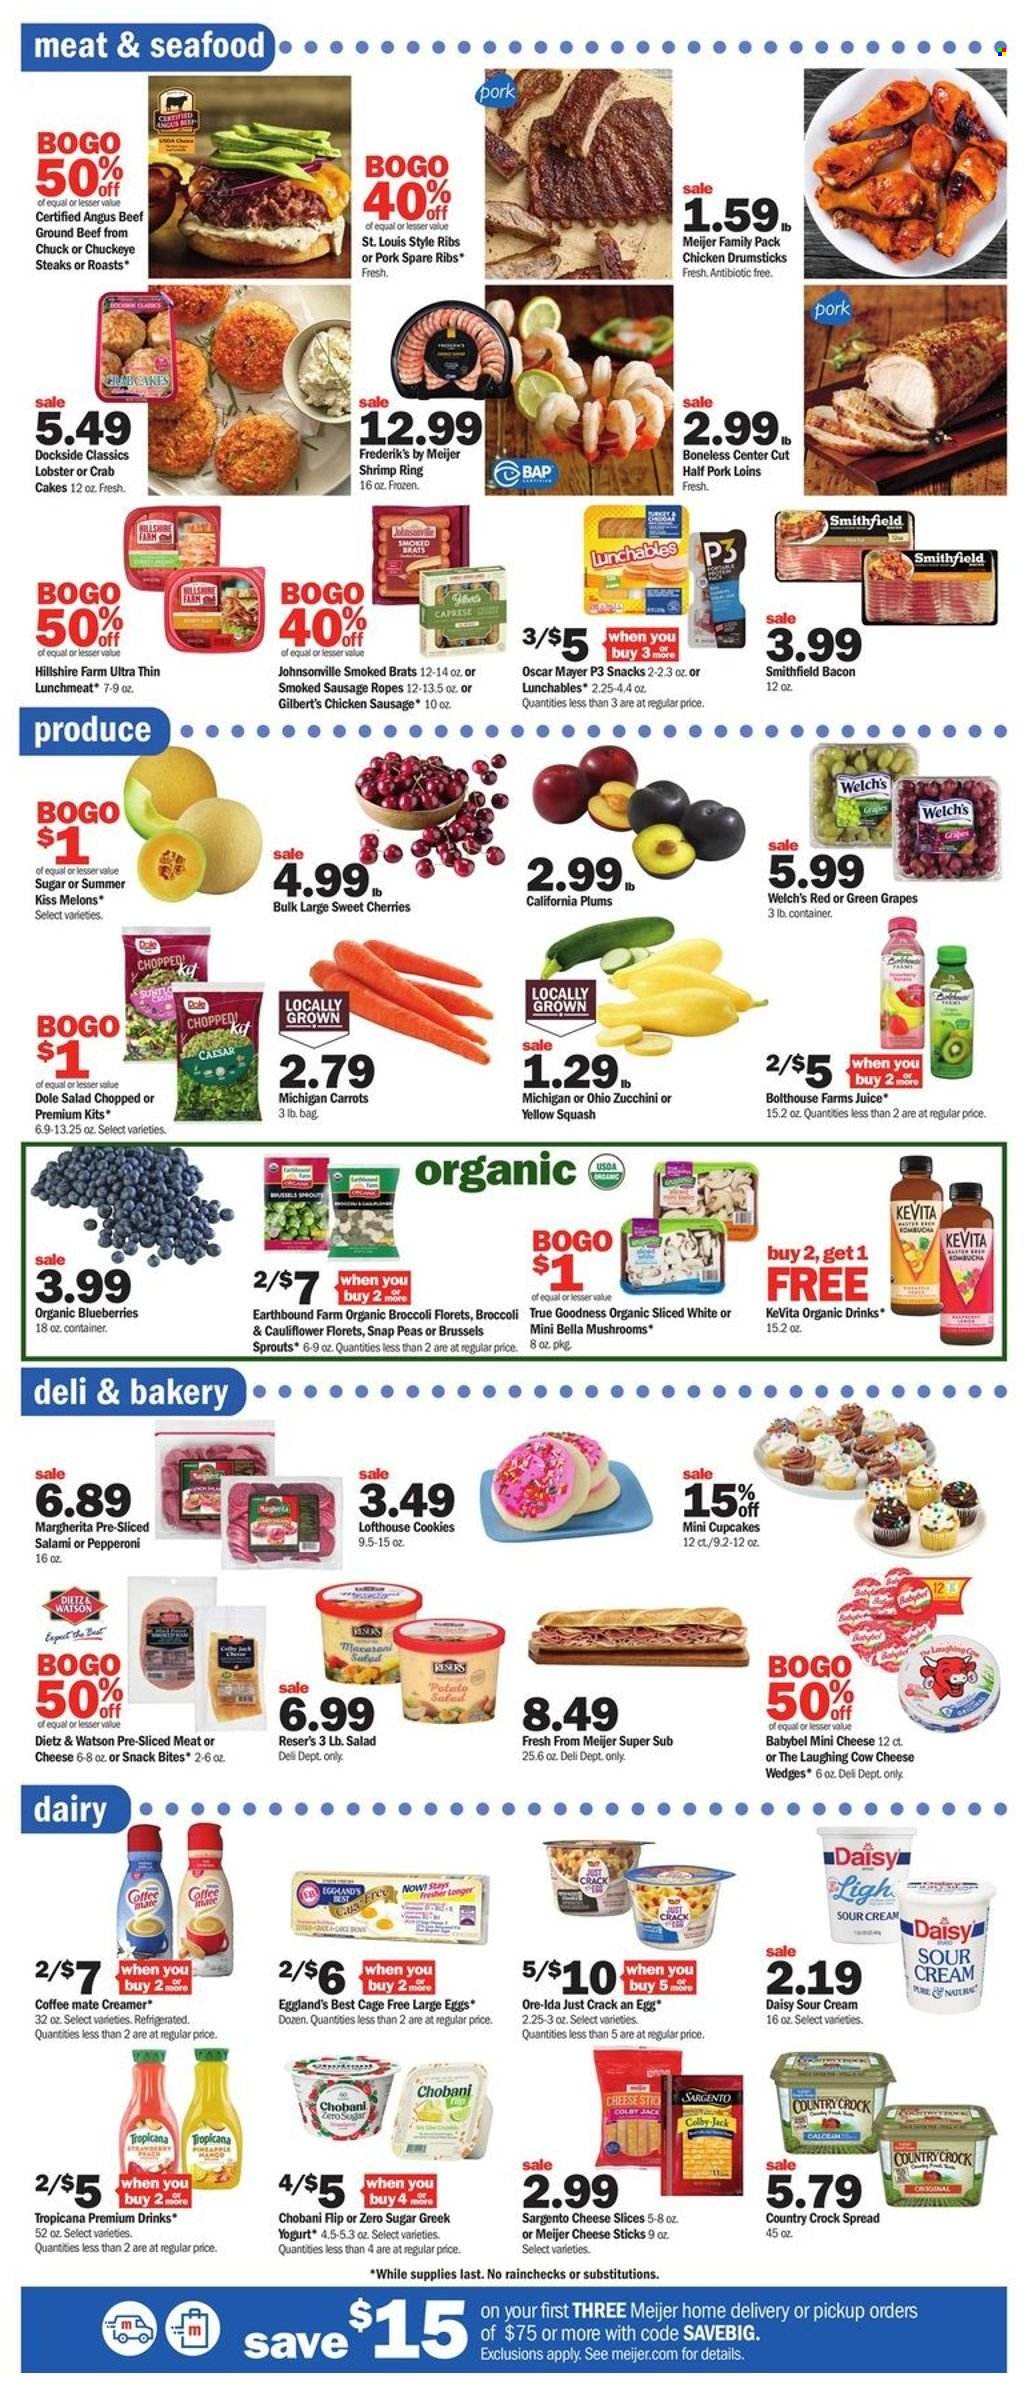 thumbnail - Meijer Flyer - 08/14/2022 - 08/20/2022 - Sales products - mushrooms, cupcake, broccoli, carrots, cauliflower, zucchini, peas, salad, Dole, brussel sprouts, yellow squash, blueberries, grapes, plums, cherries, Welch's, lobster, seafood, shrimps, crab cake, macaroni, Lunchables, bacon, salami, Hillshire Farm, Johnsonville, Oscar Mayer, Dietz & Watson, sausage, smoked sausage, pepperoni, chicken sausage, Gilbert’s, potato salad, lunch meat, Colby cheese, sliced cheese, The Laughing Cow, Babybel, Sargento, greek yoghurt, yoghurt, Chobani, Coffee-Mate, cage free eggs, large eggs, sour cream, creamer, snap peas, cheese sticks, Ore-Ida, cookies, juice, KeVita, chicken drumsticks, beef meat, ground beef, steak, pork meat, pork ribs, pork spare ribs, container, melons. Page 2.